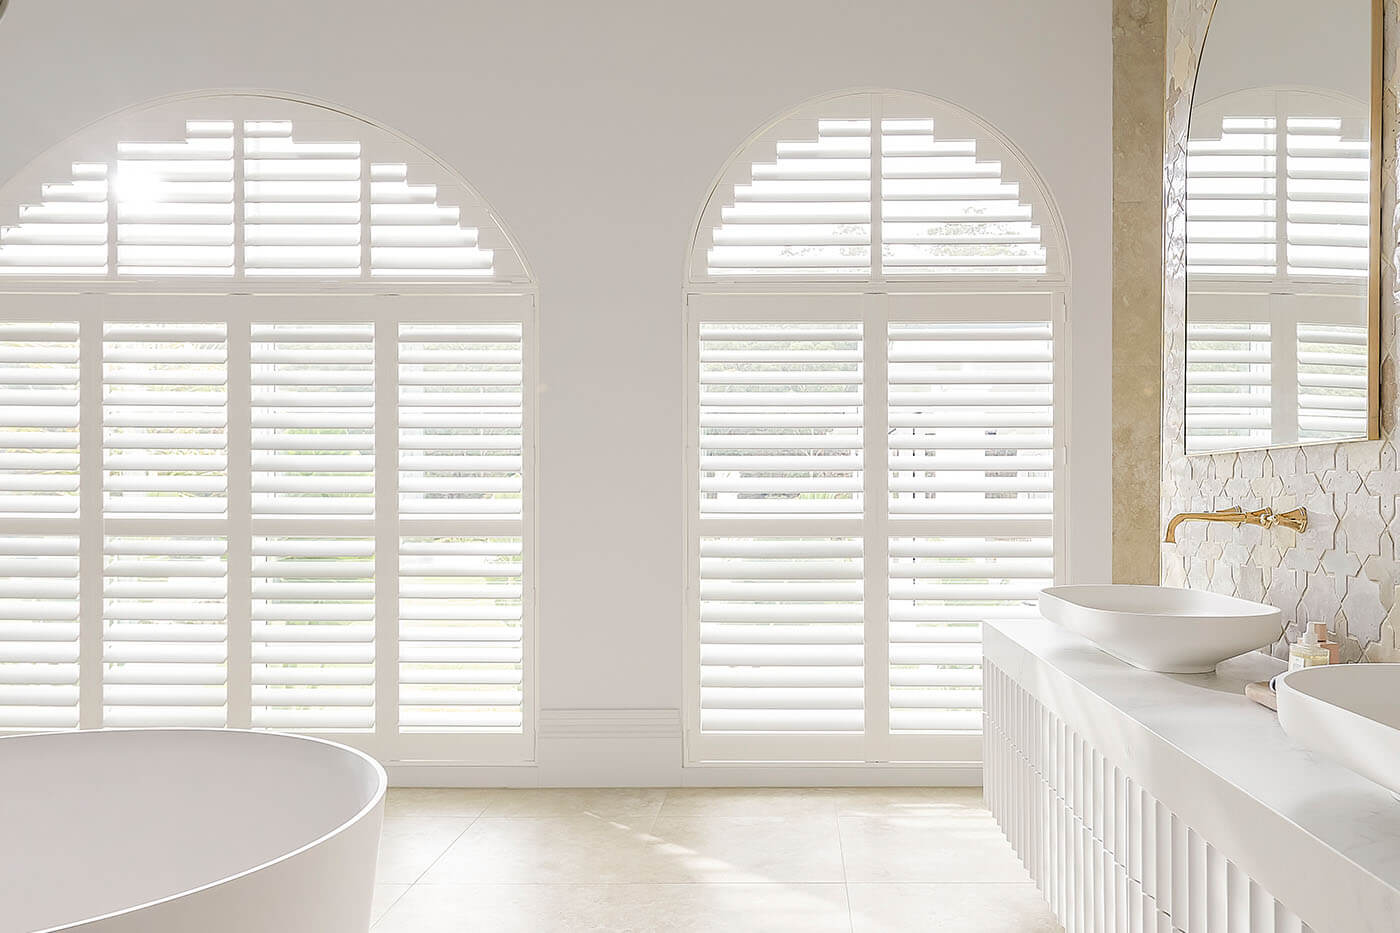 Classic transitional style white bathroom with large radius windows covered by Polysatin Shutters, offering light and privacy control in the bathroom. Suitable for wet areas. For sale in our Brisbane showroom.